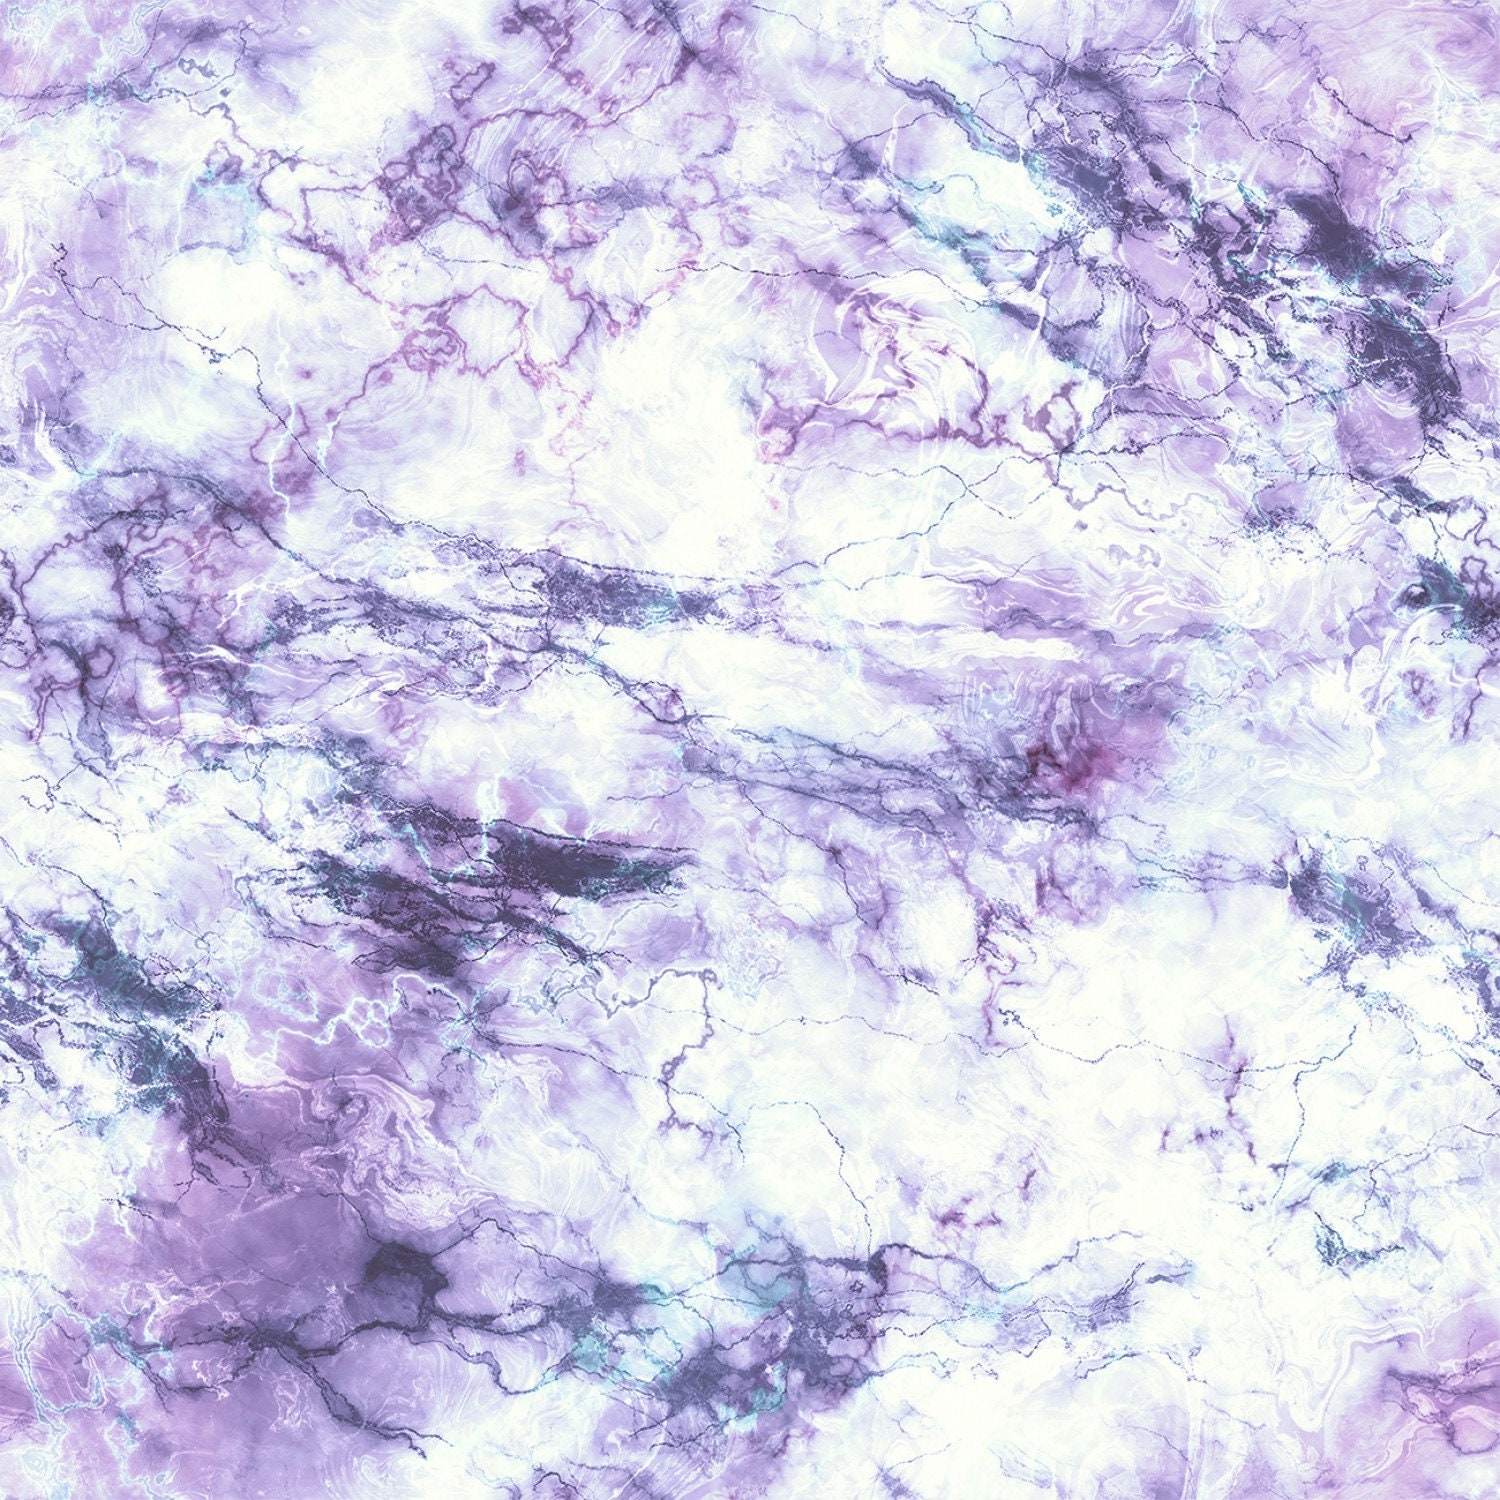 Marbled Amethyst Blender Fabric By The Yard From Hoffman Fabrics Spectrum, & Fat Quarters Available